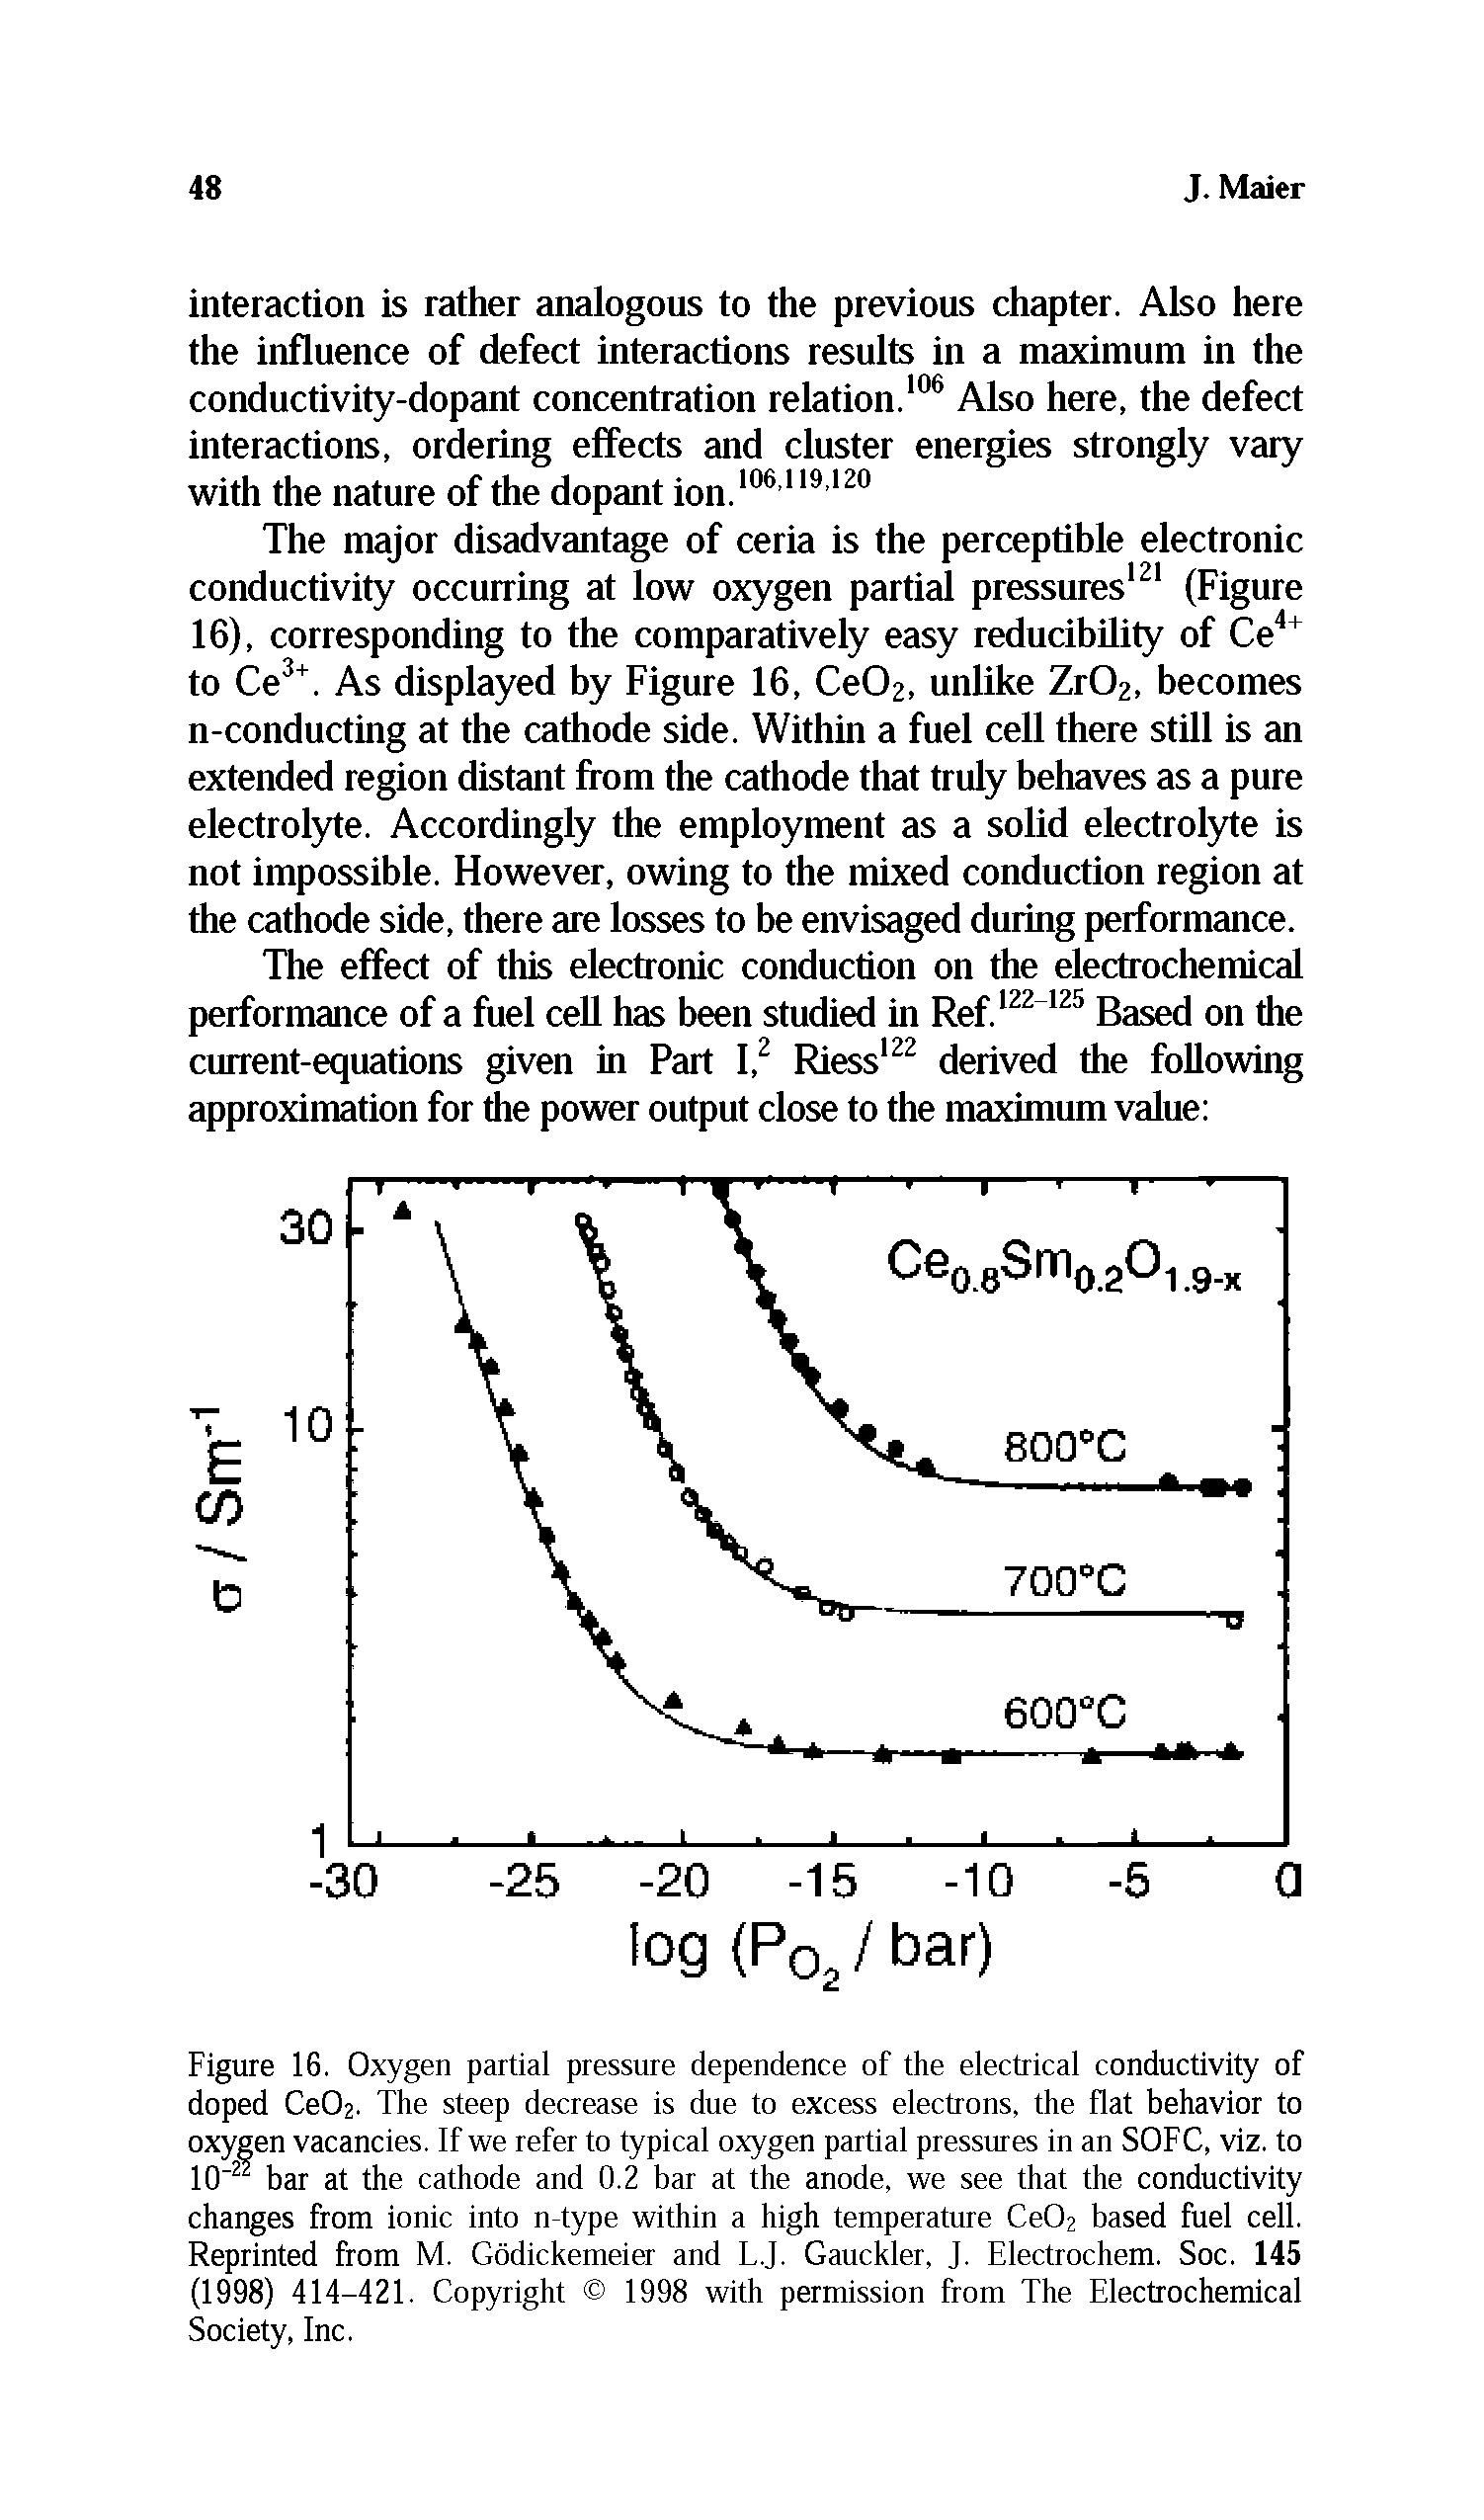 Figure 16. Oxygen partial pressure dependence of the electrical conductivity of doped Ce02. The steep decrease is due to excess electrons, the flat behavior to oxygen vacancies. If we refer to typical oxygen partial pressures in an SOFC, viz. to 10" bar at the cathode and 0.2 bar at the anode, we see that the conductivity changes from ionic into n-type within a high temperature Ce02 based fuel cell. Reprinted from M. Godickemeier and L.J. Gauckler, J. Electrochem. Soc. 145 (1998) 414-421. Copyright 1998 with permission from The Electrochemical Society, Inc.